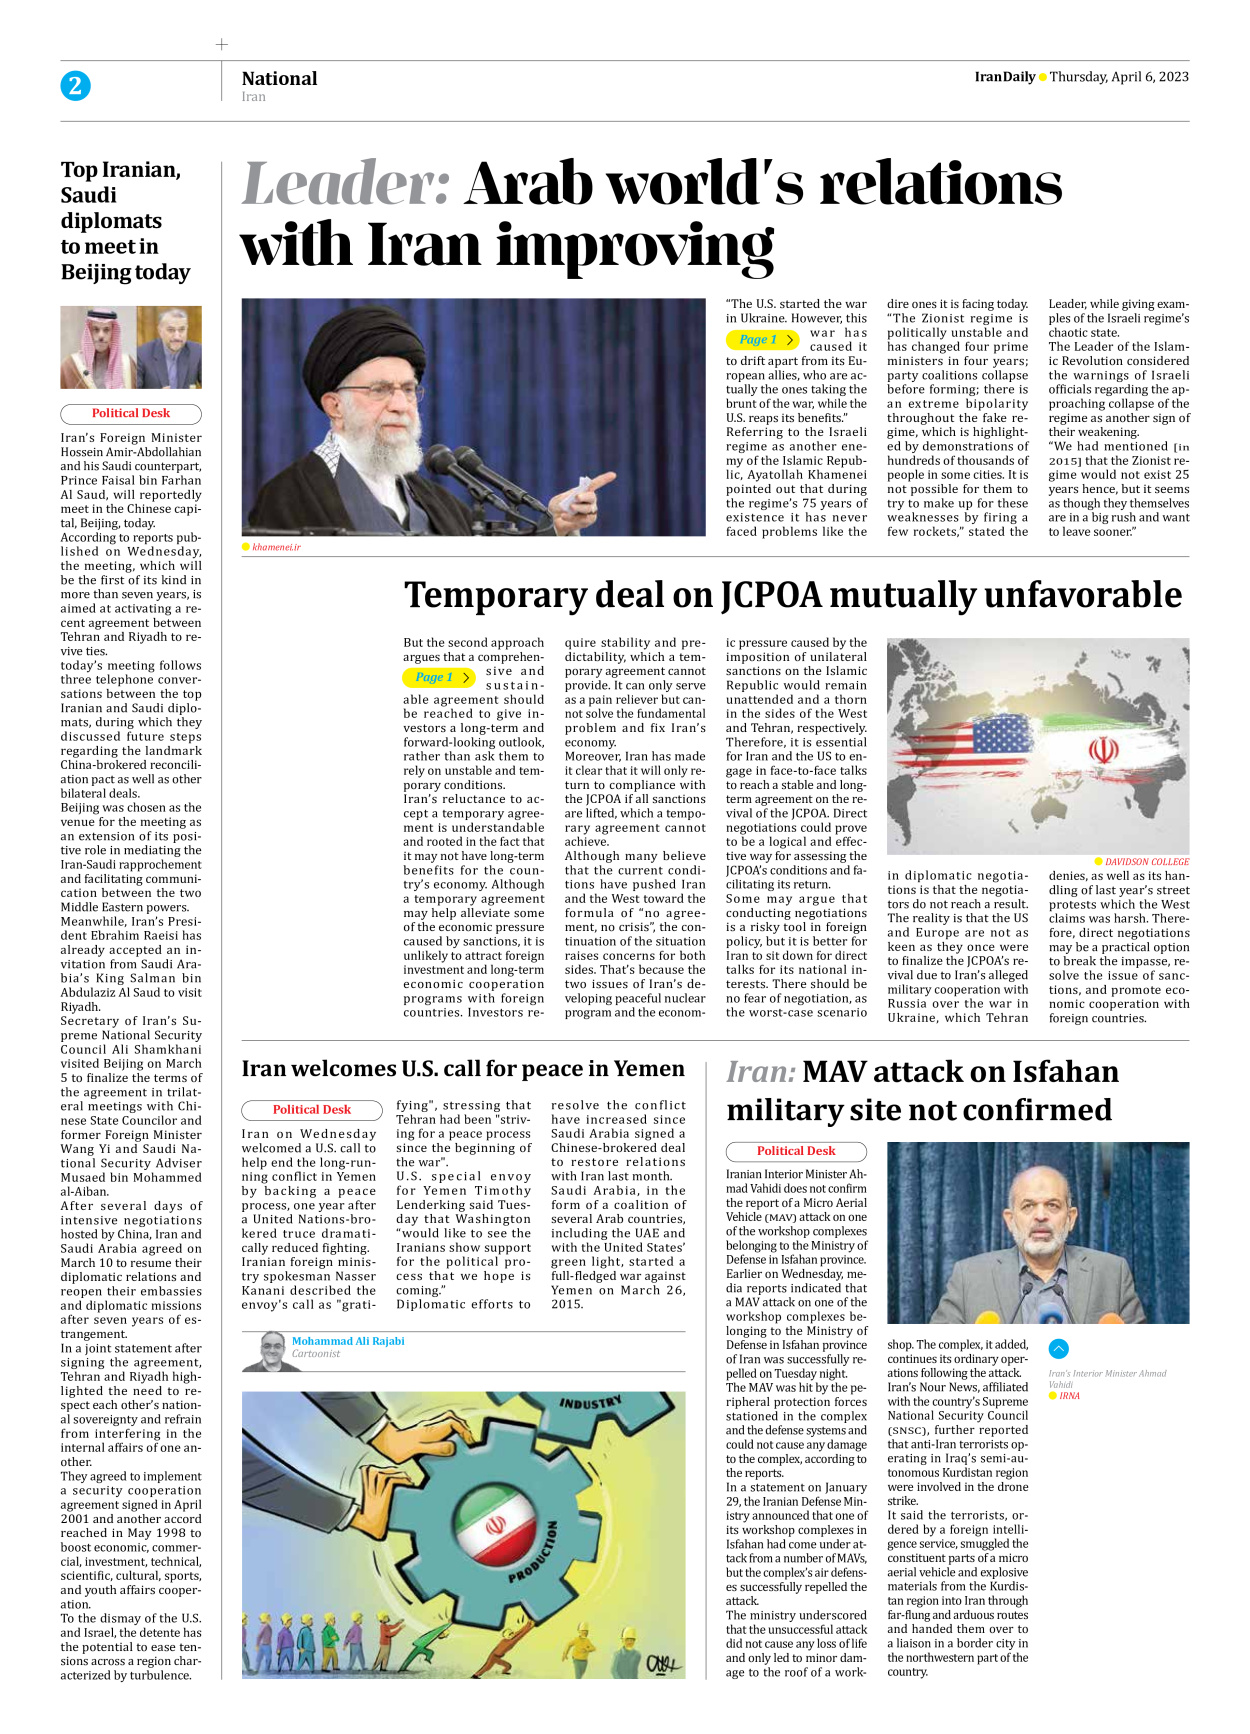 Iran Daily - Number Seven Thousand Two Hundred and Sixty Three - 06 April 2023 - Page 2